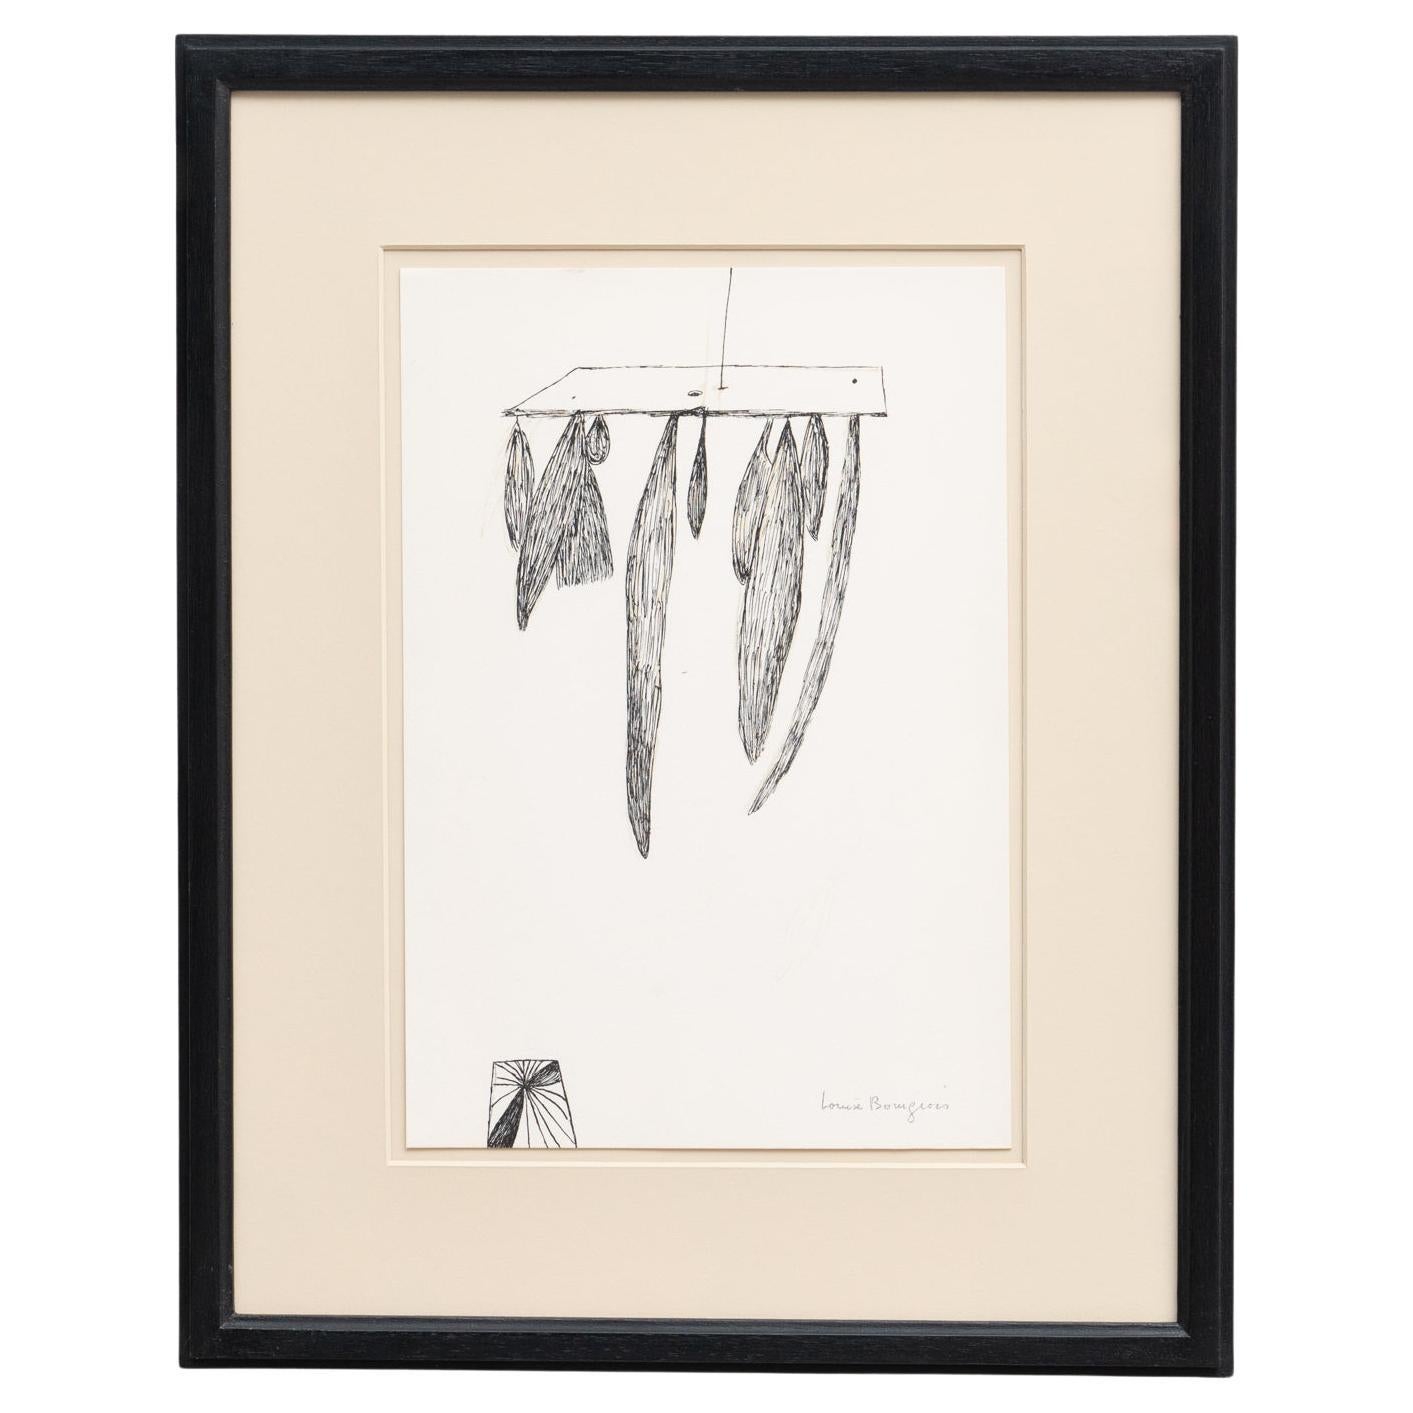 Louise Bourgeois 'Sheaves' Lithography, 1985